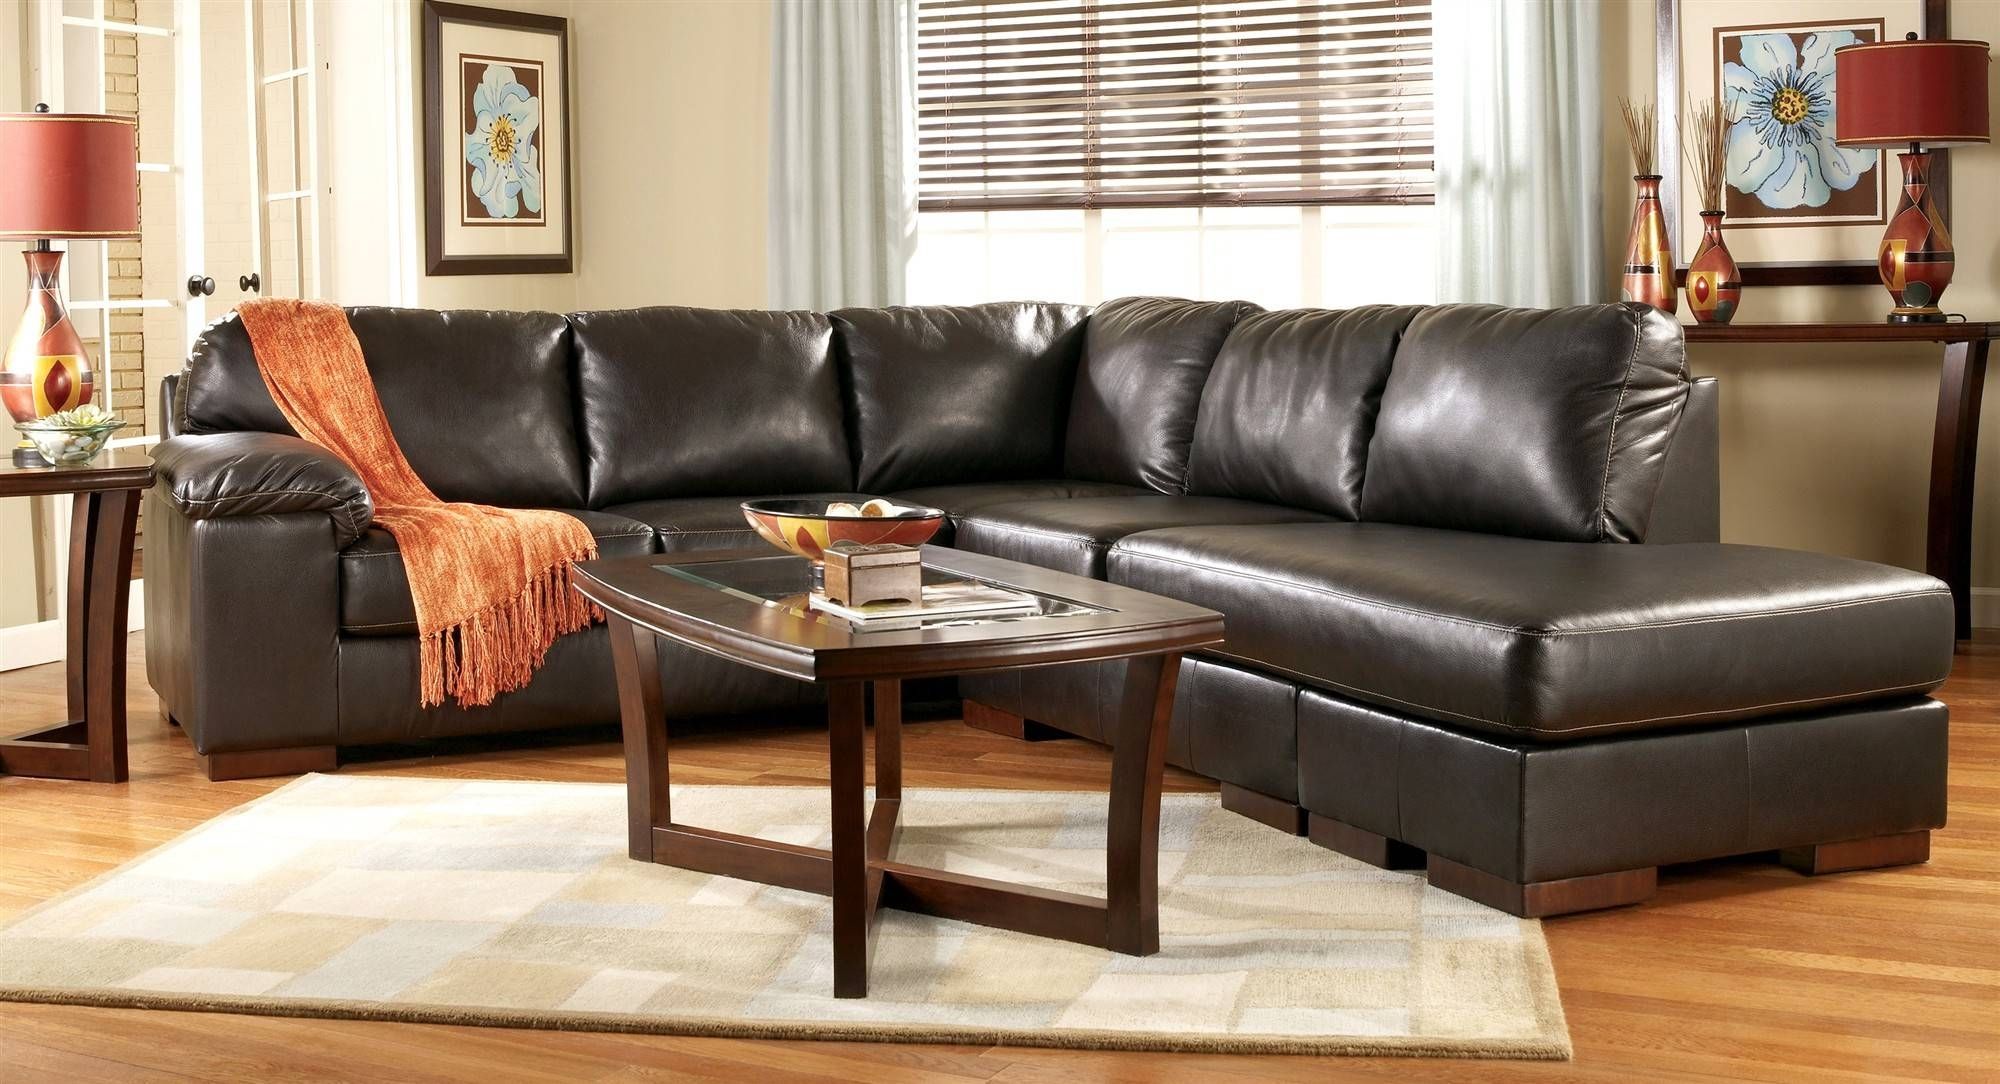 Black Leather Sofas For Sale (View 13 of 15)